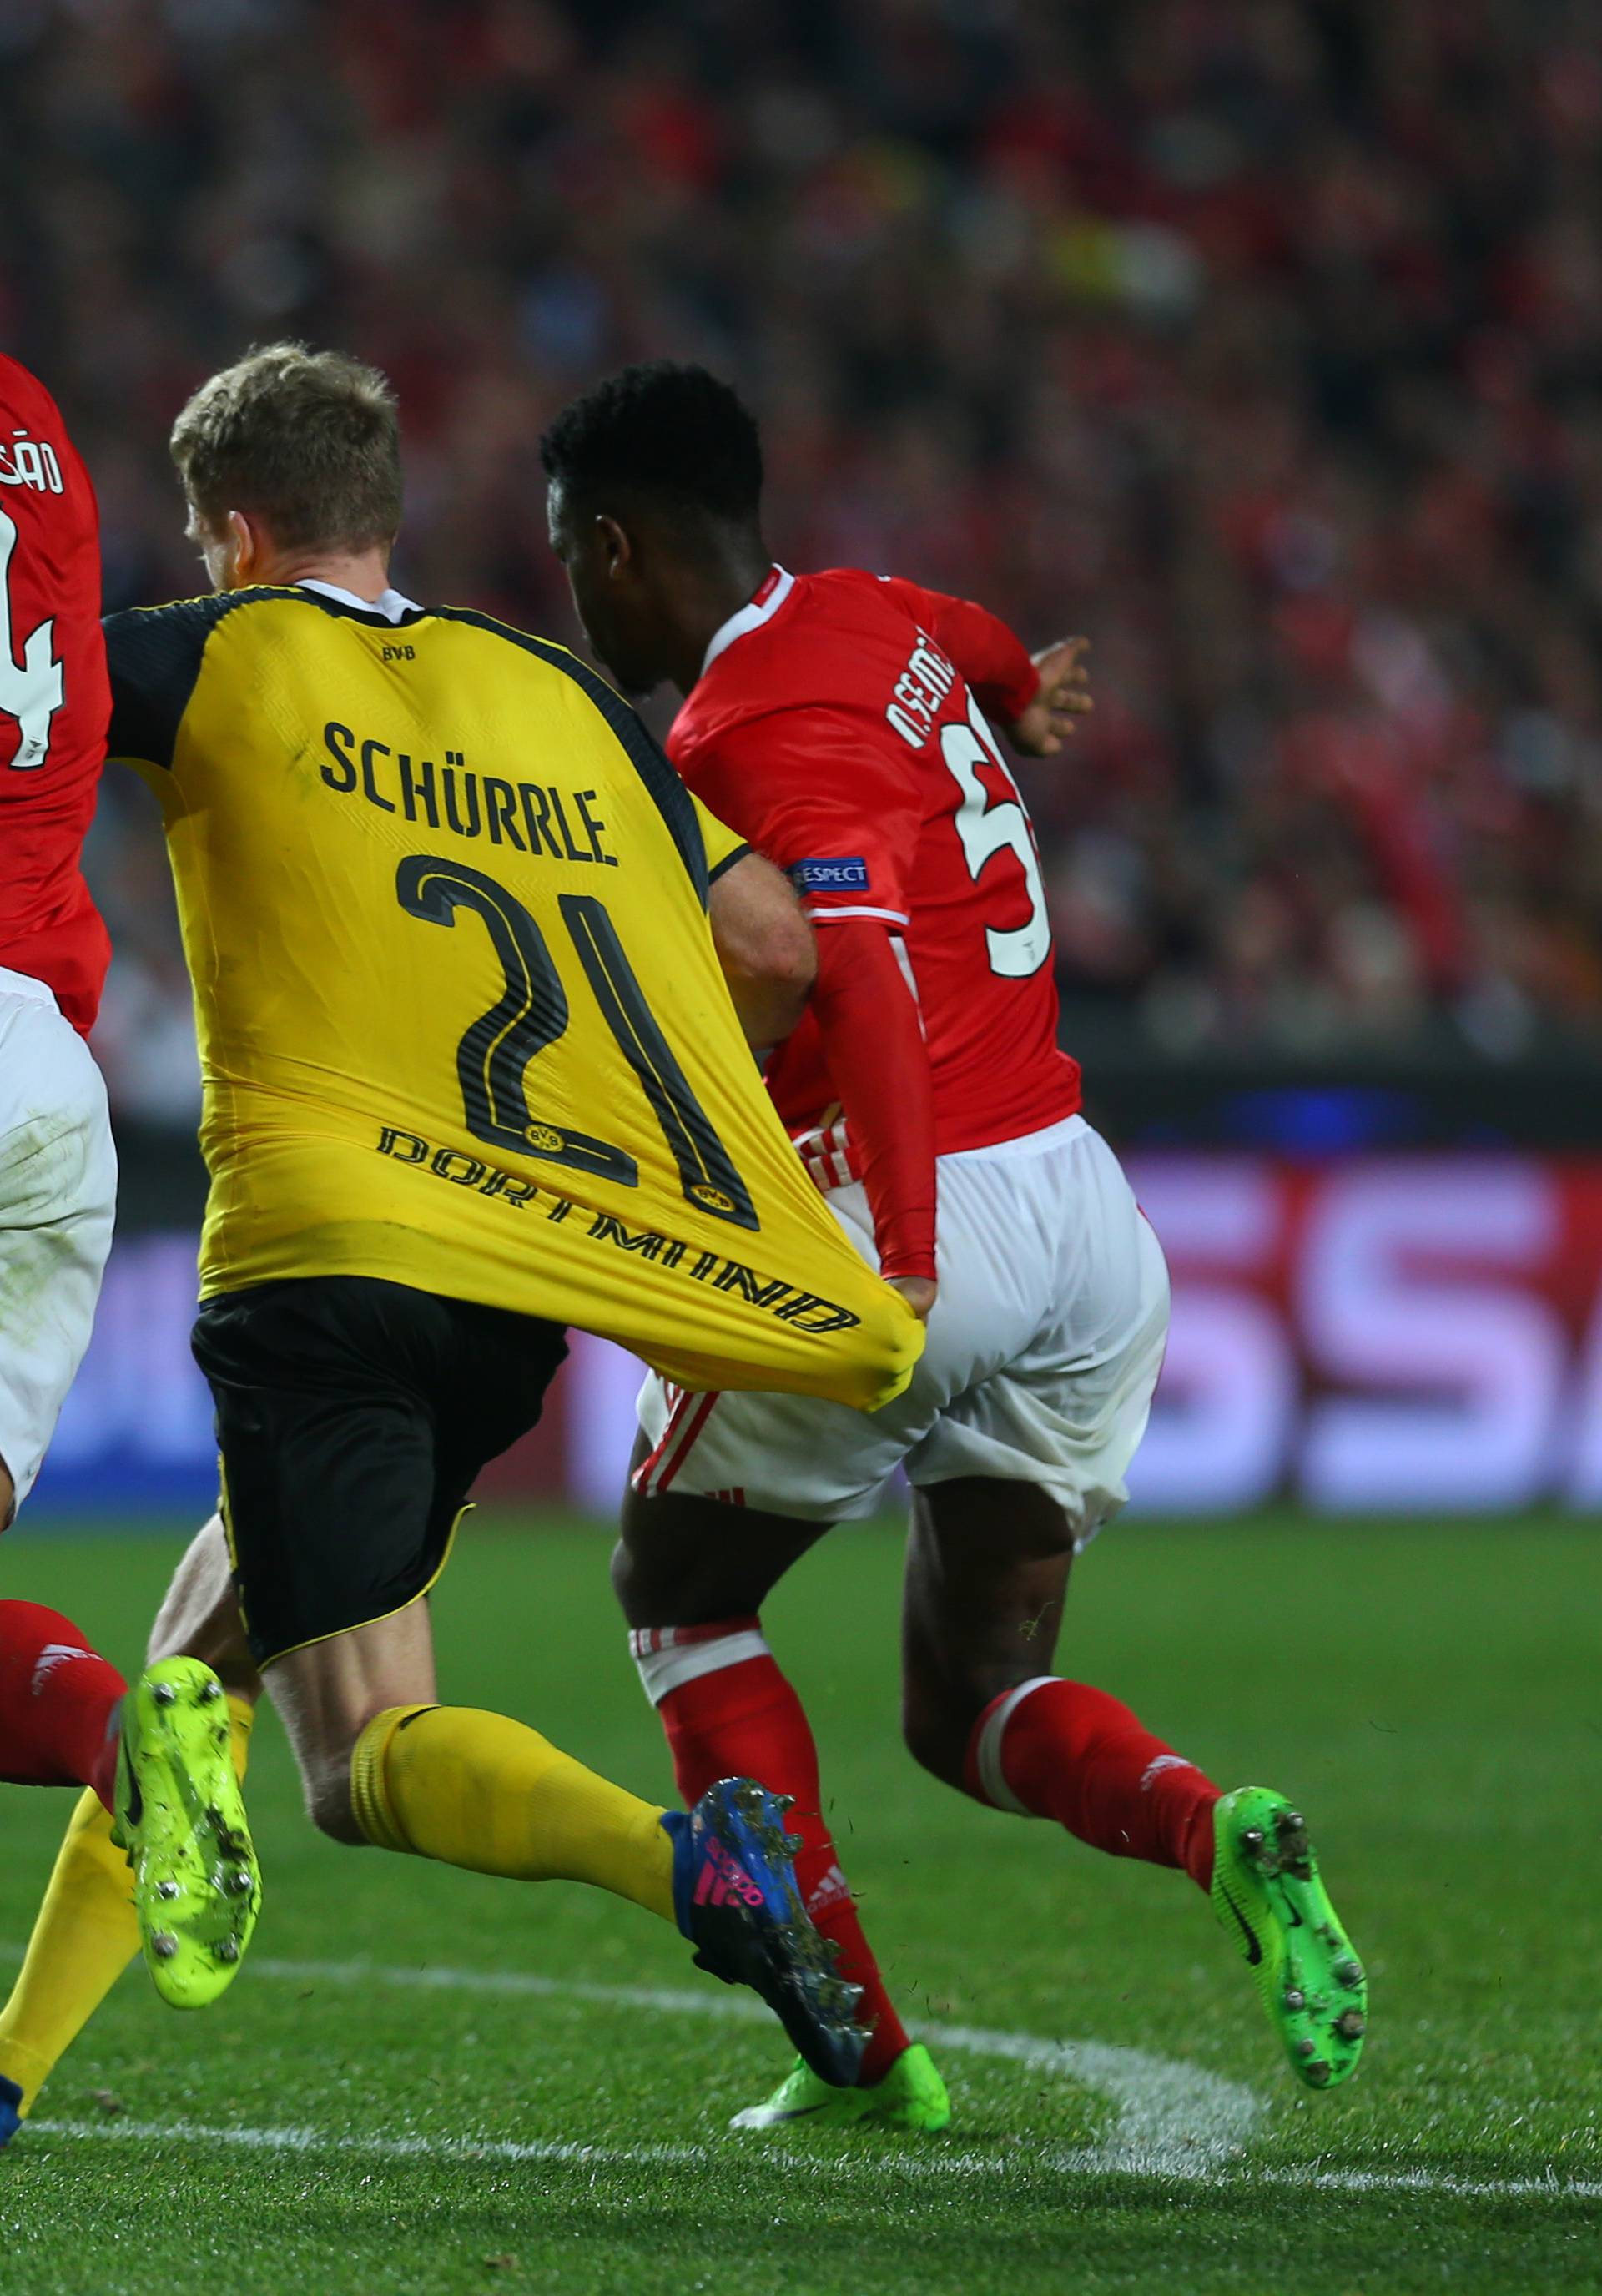 Benfica's Luisao and Nelson Semedo in action with Borrusia Dortmund's Andre Schurrle